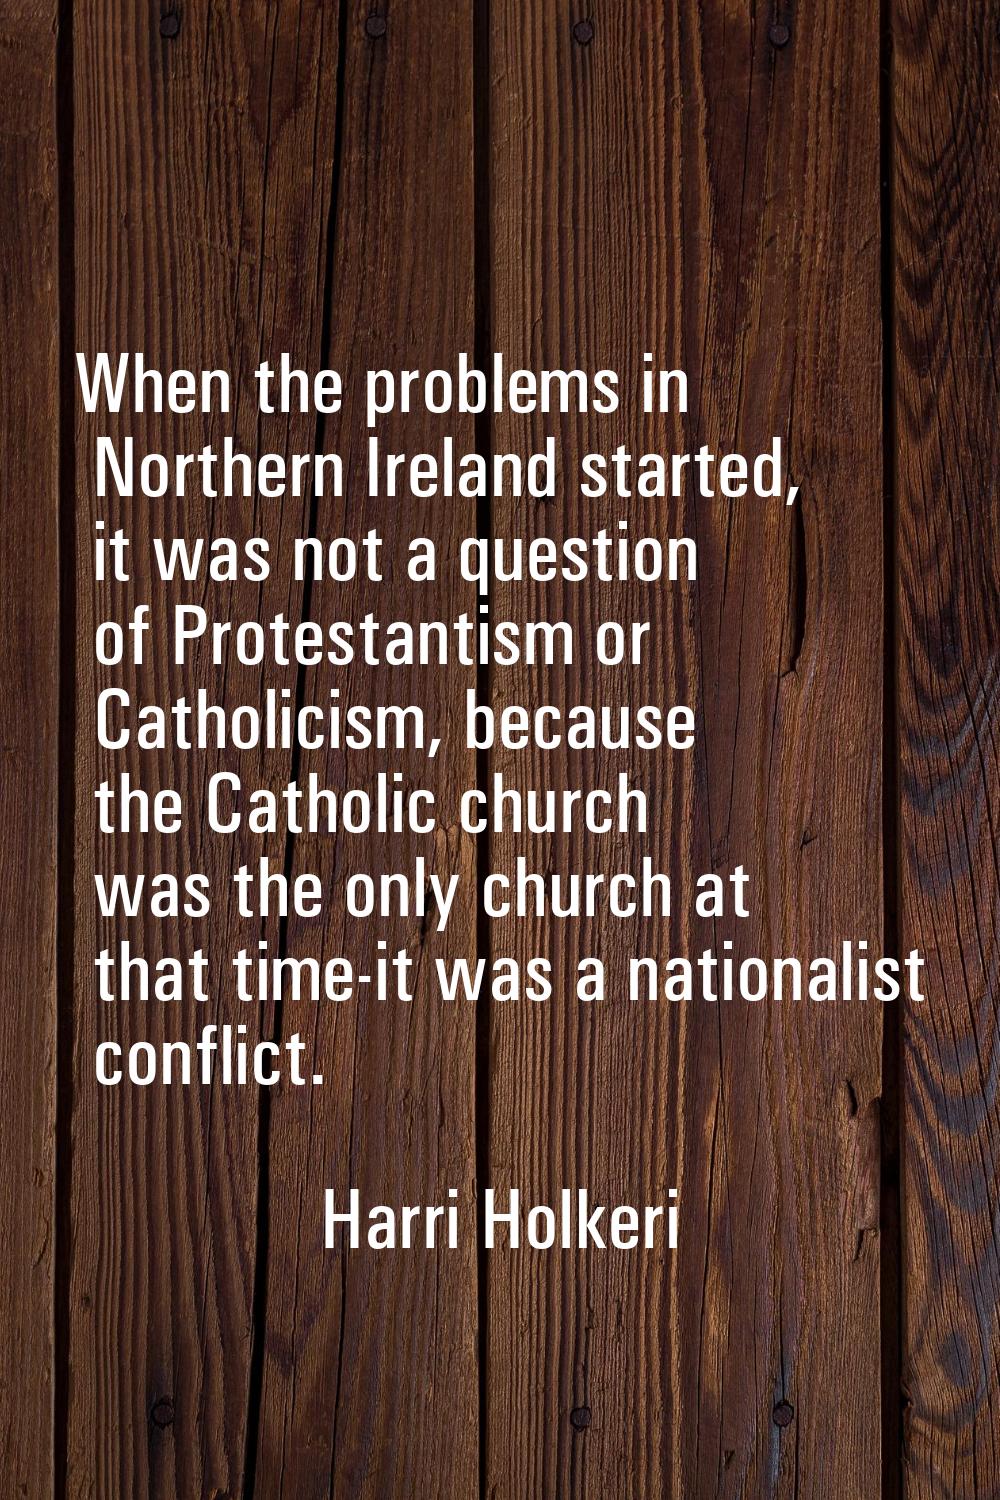 When the problems in Northern Ireland started, it was not a question of Protestantism or Catholicis